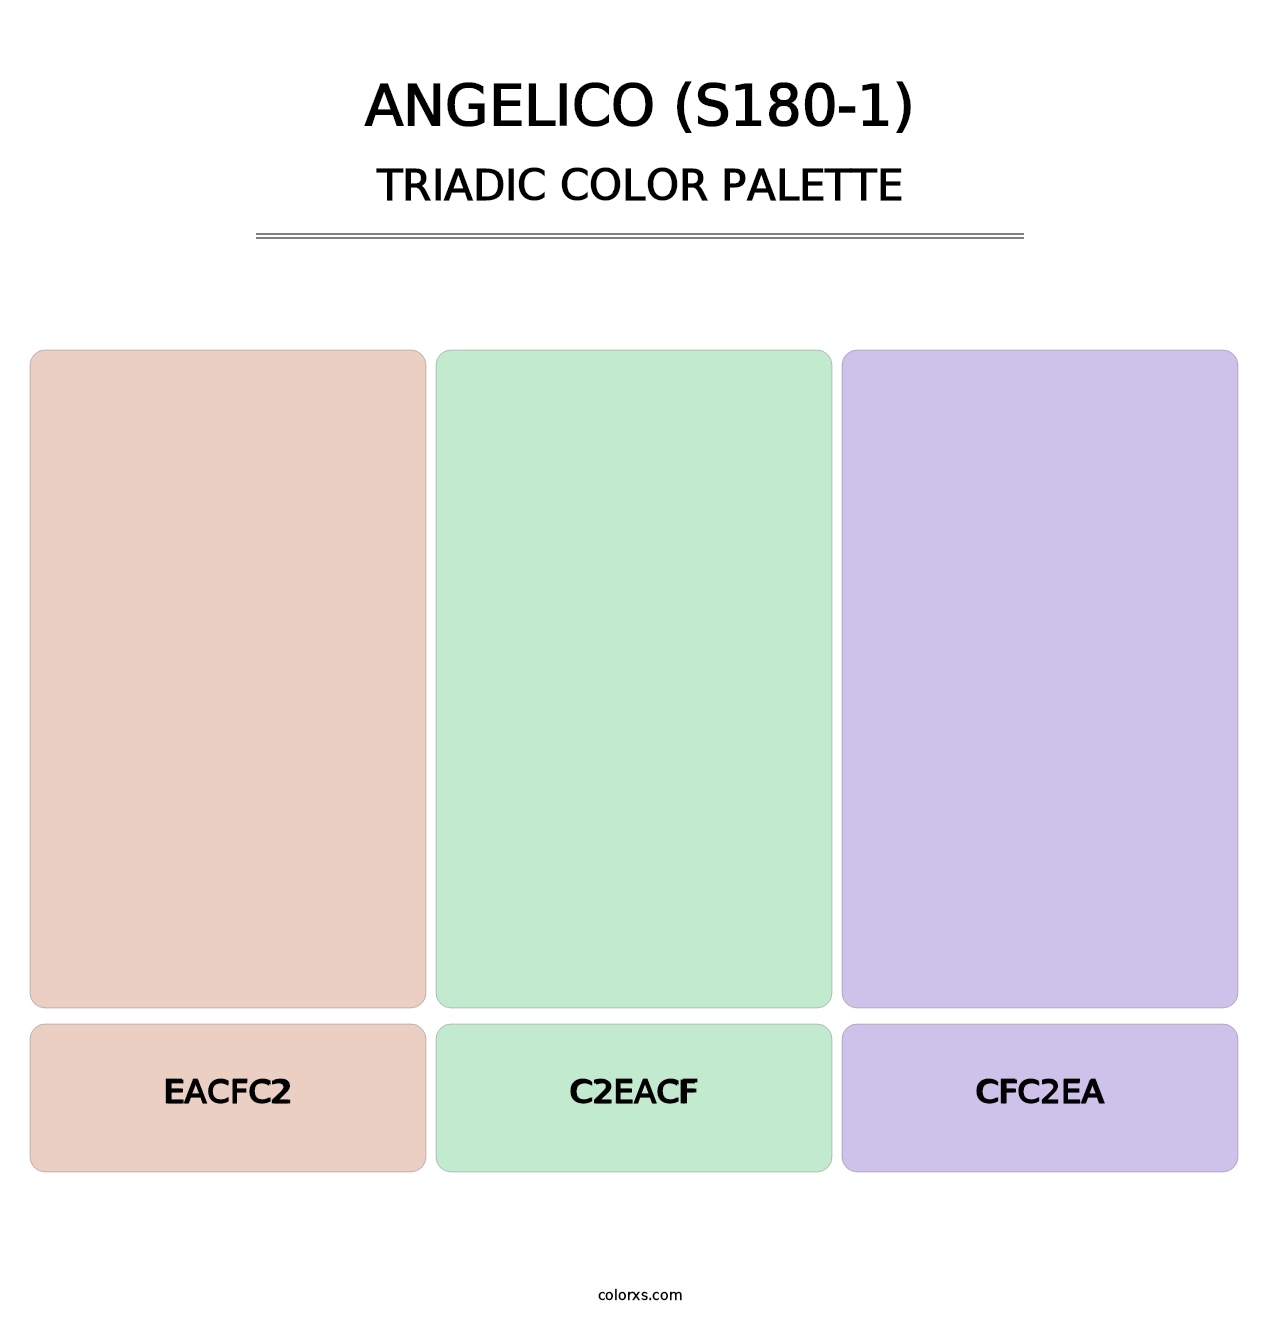 Angelico (S180-1) - Triadic Color Palette